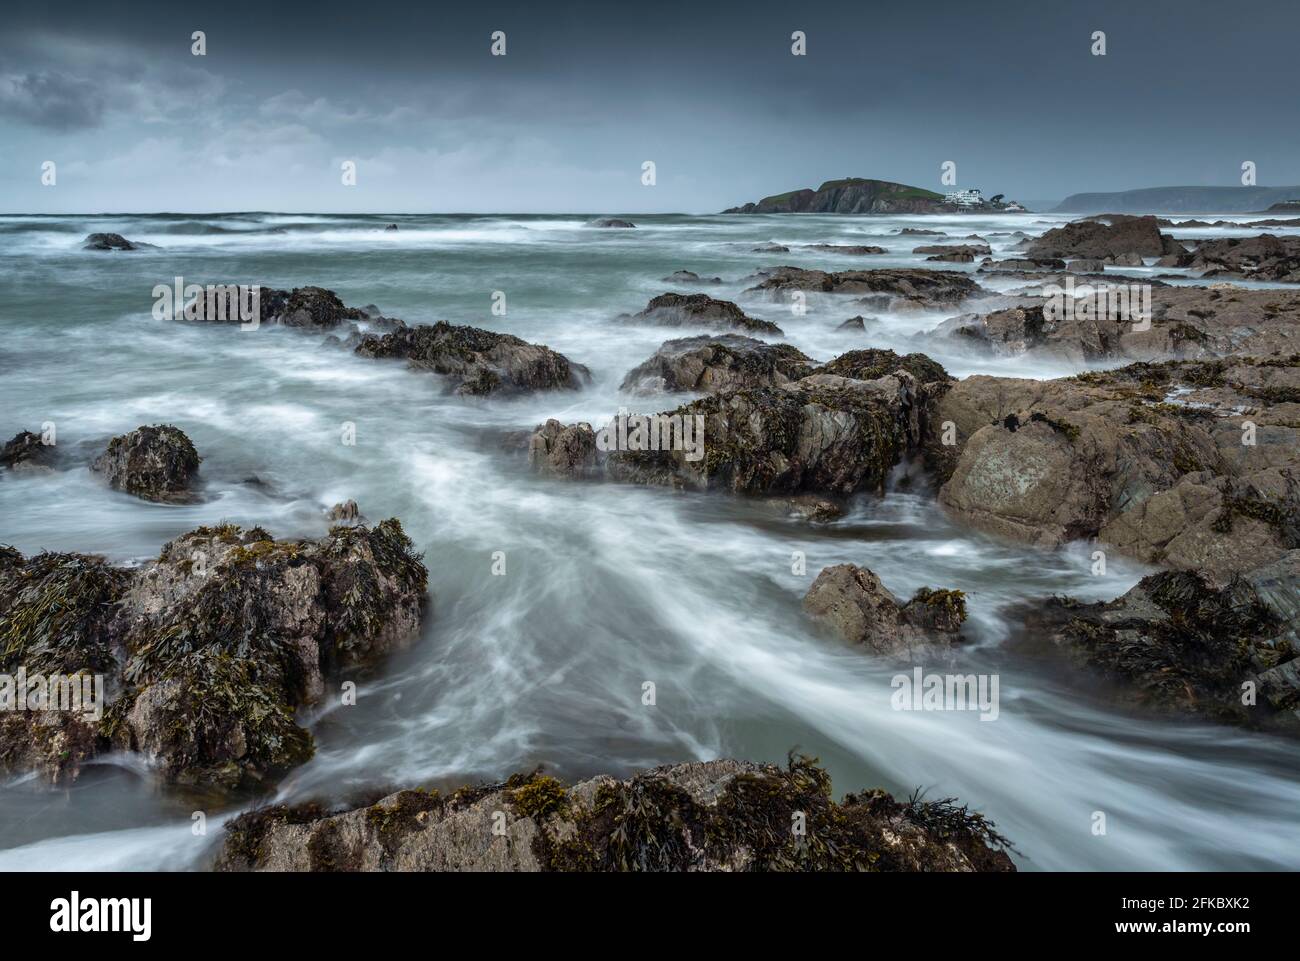 Stormy conditions on the rocky Bantham coast, looking across to Burgh Island, Devon, England, United Kingdom, Europe Stock Photo